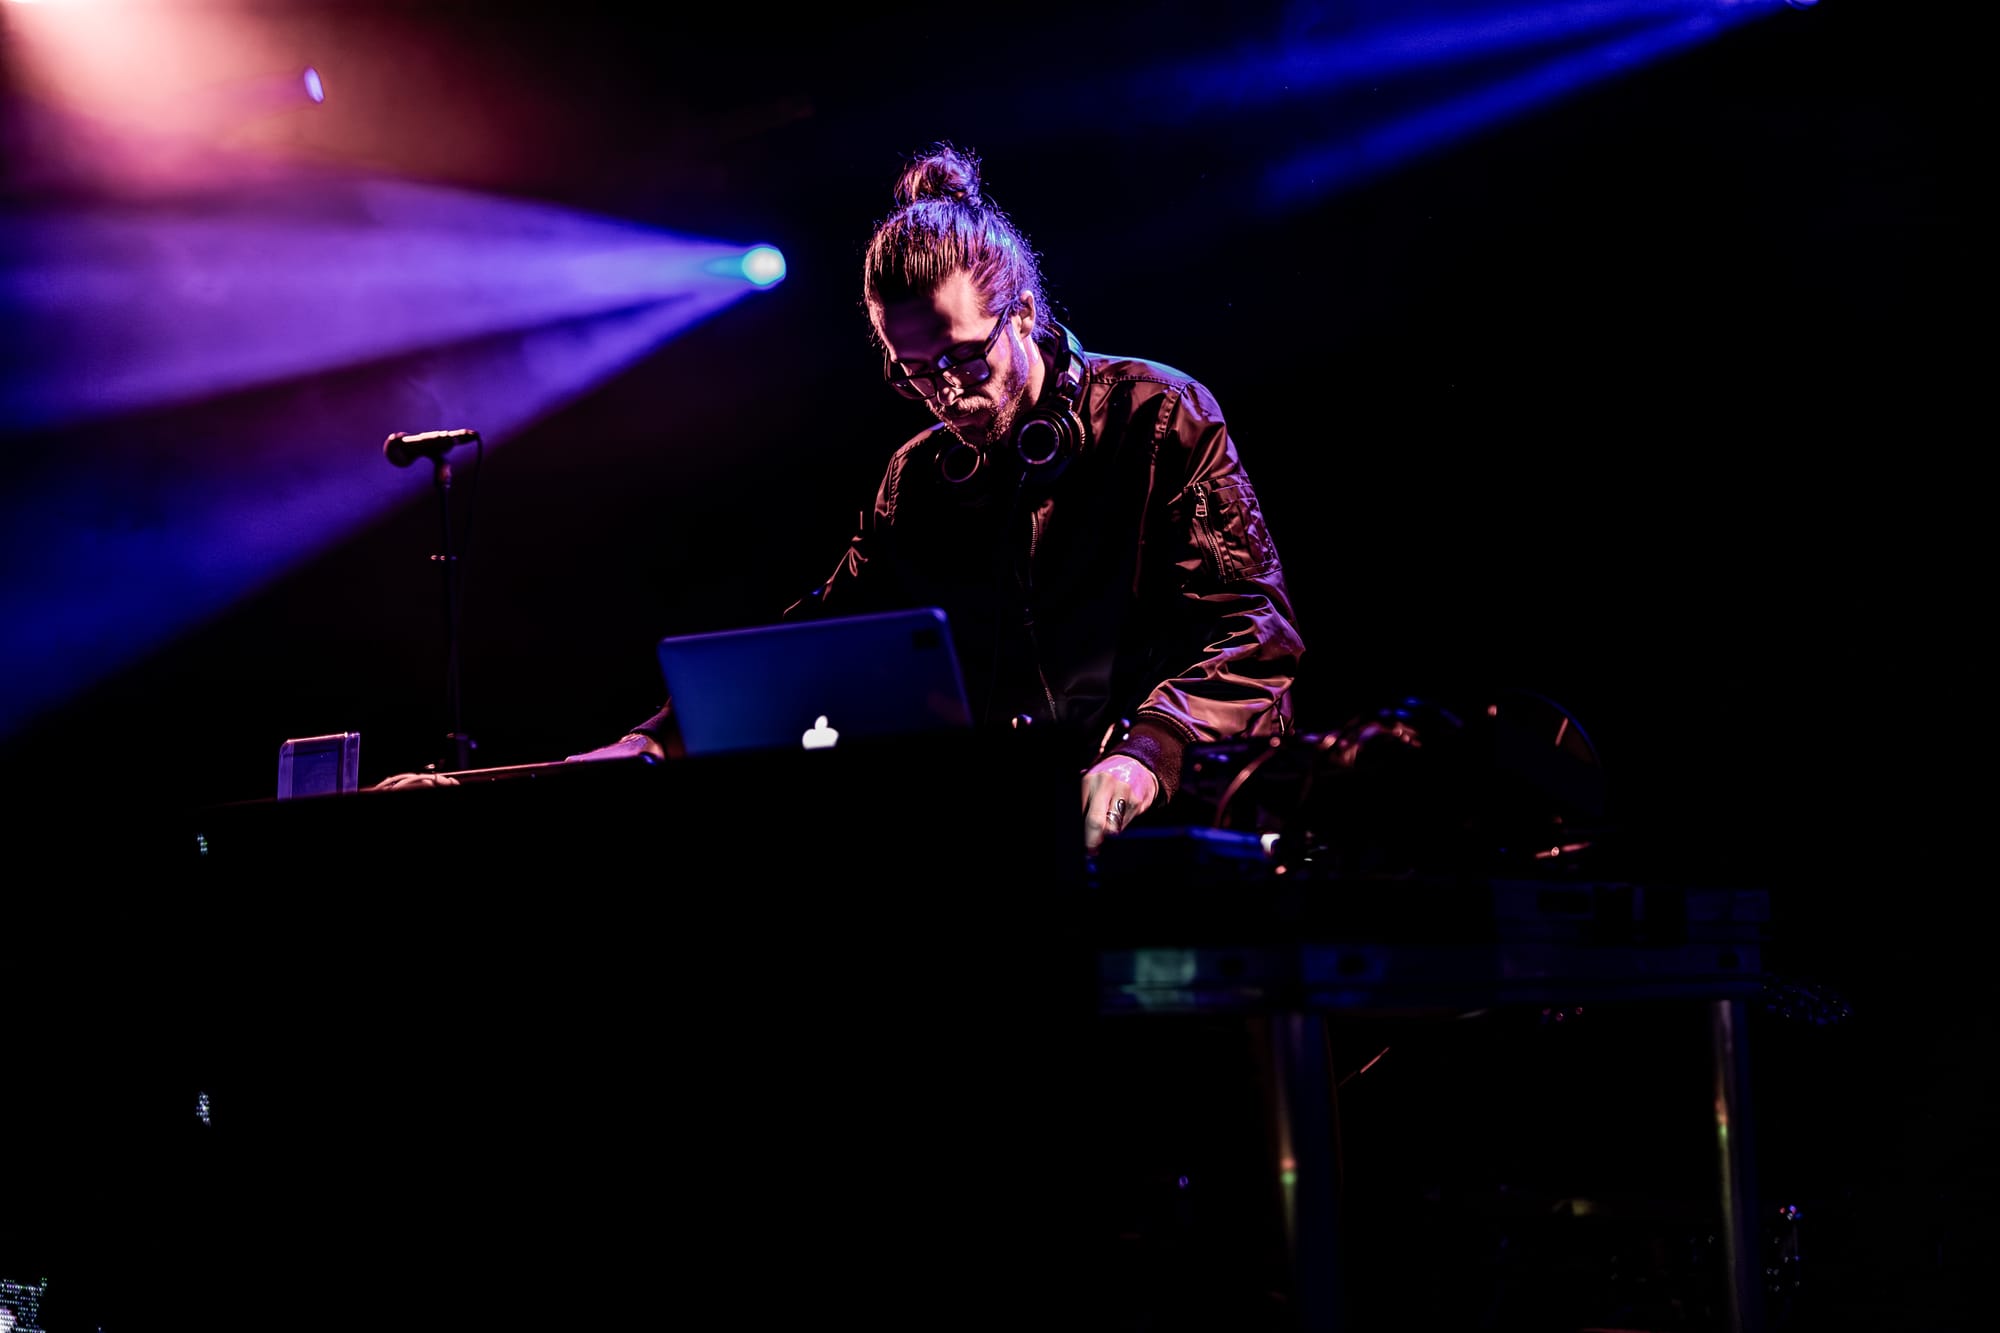 HEBL live at the Vinyl Music Hall 4/13 (photos by Moth)